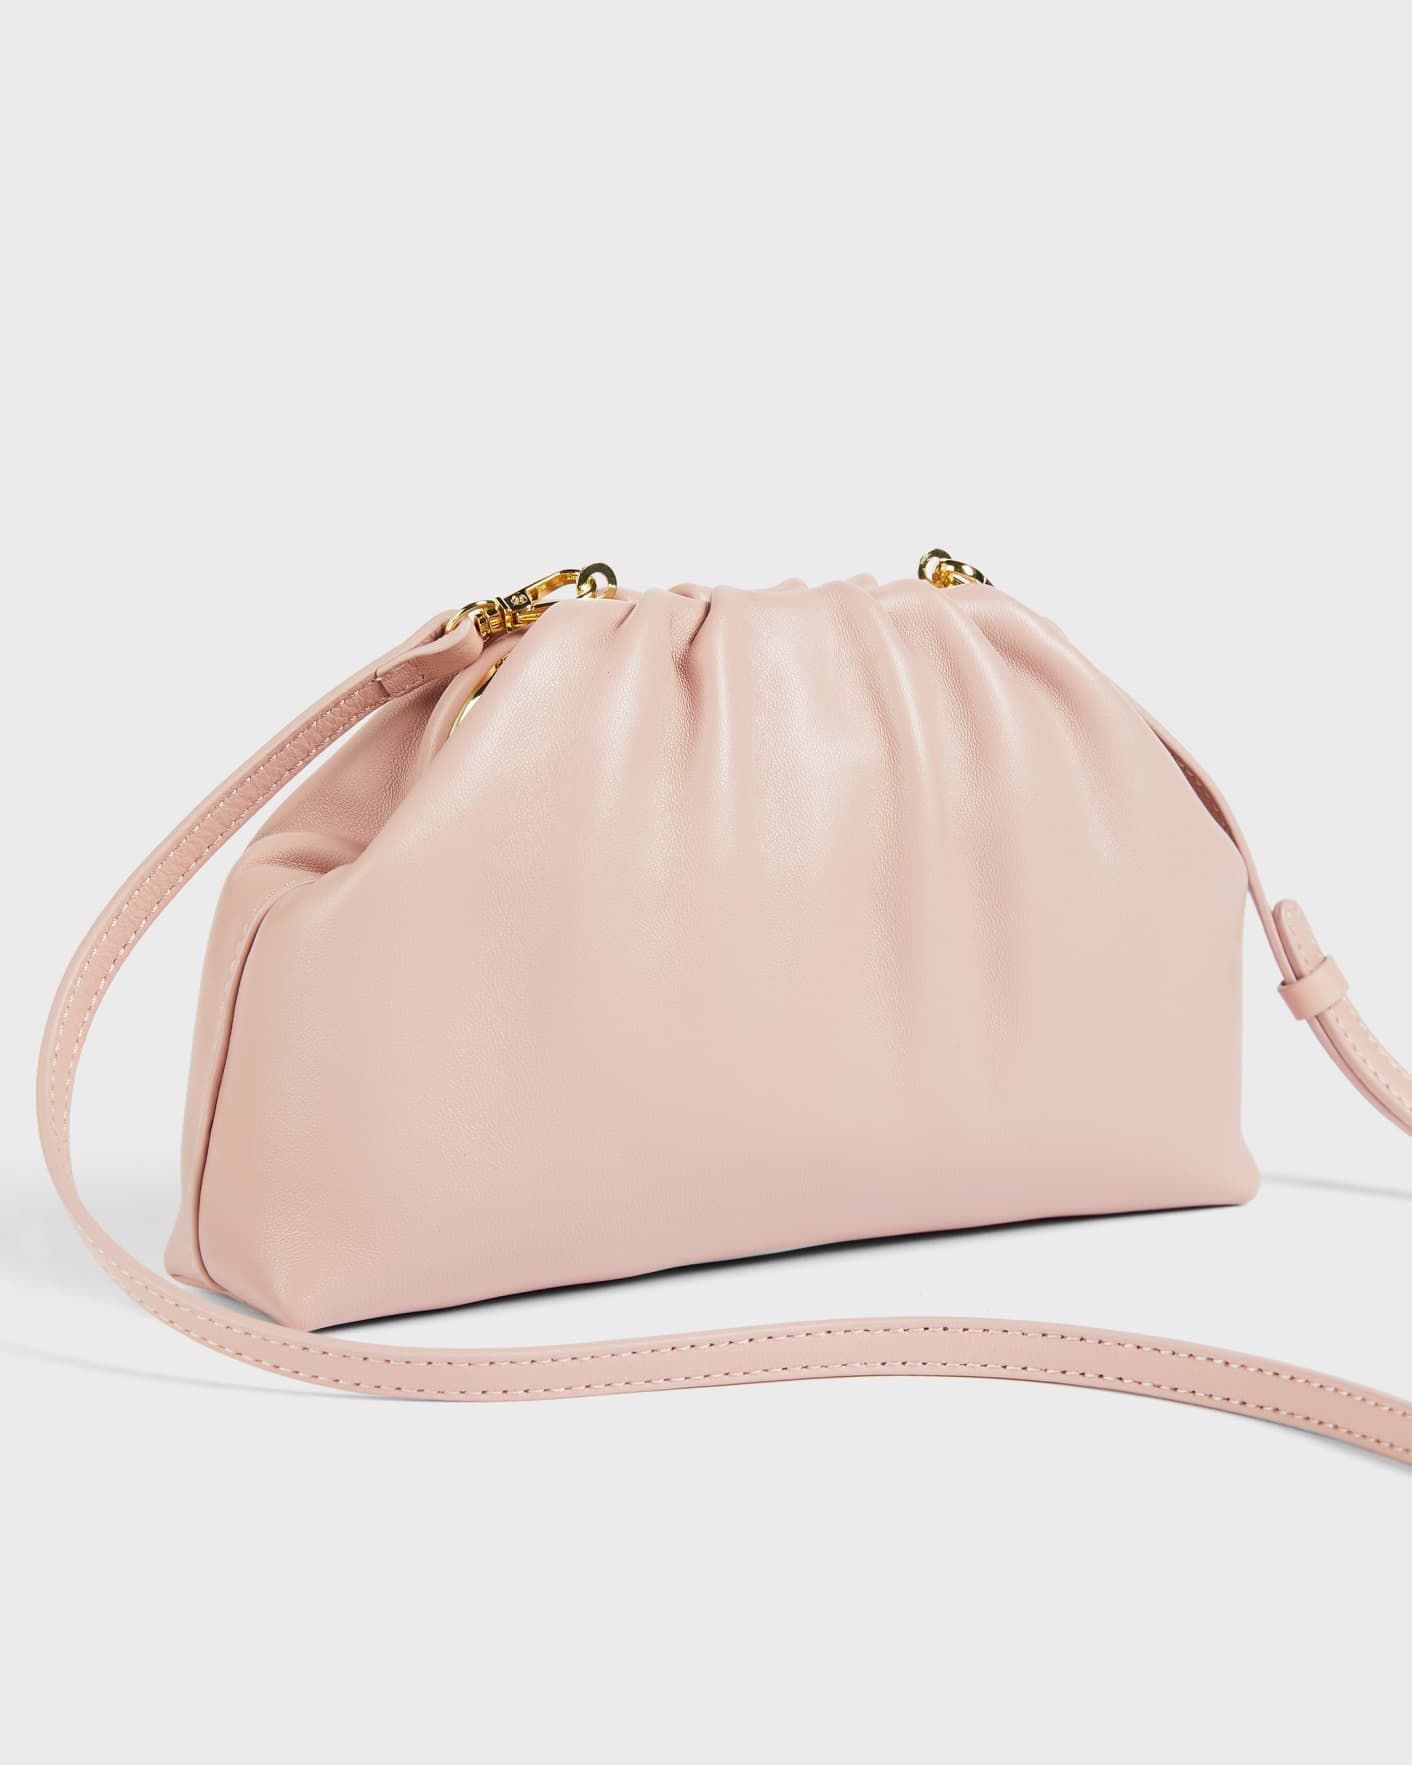 PL-PINK Mini Gathered Slouchy Clutch Ted Baker